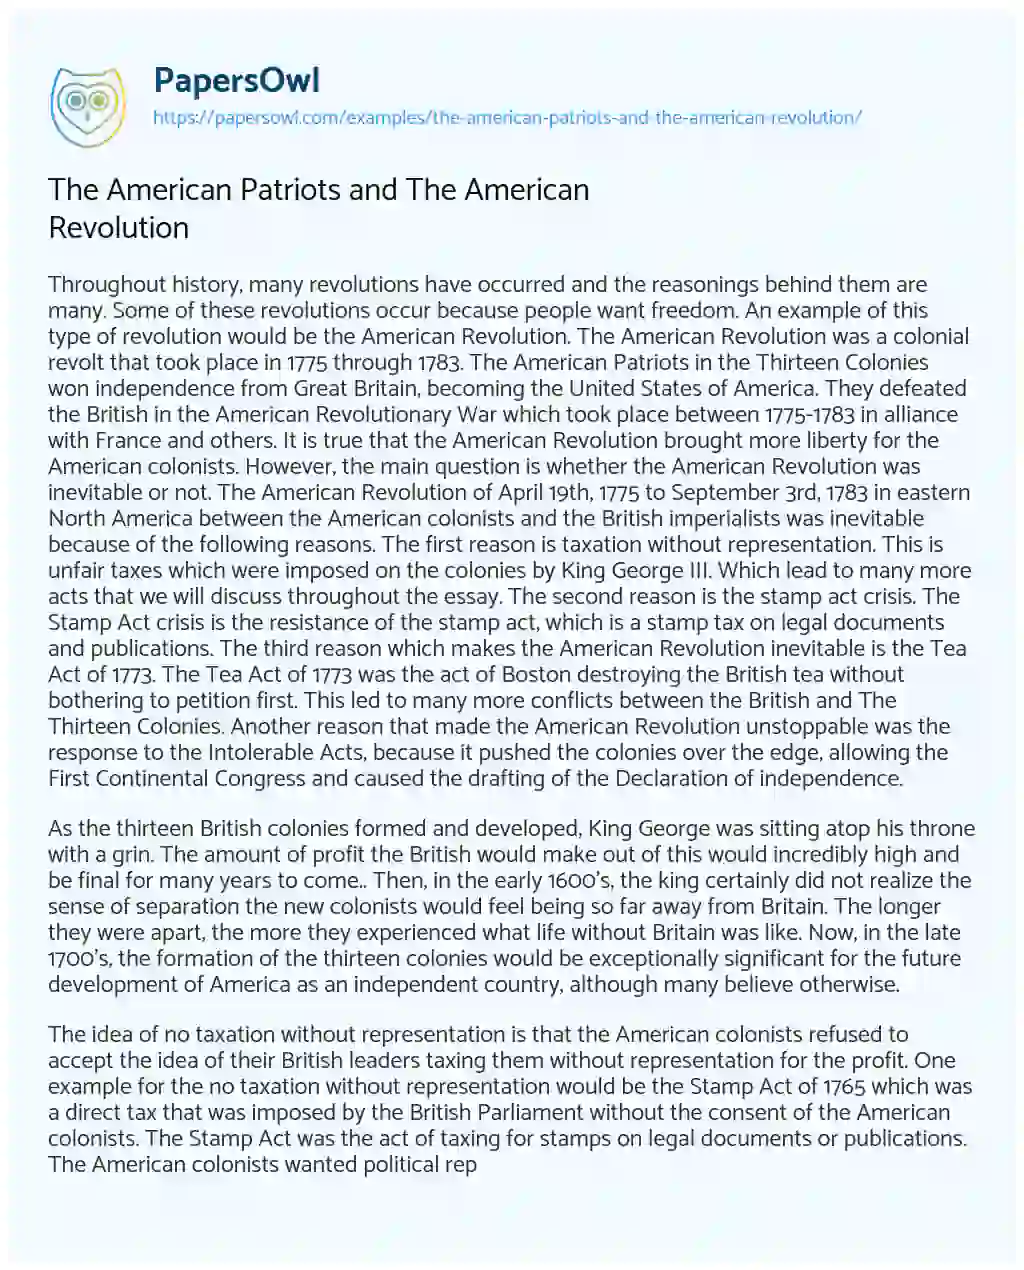 Essay on The American Patriots and the American Revolution